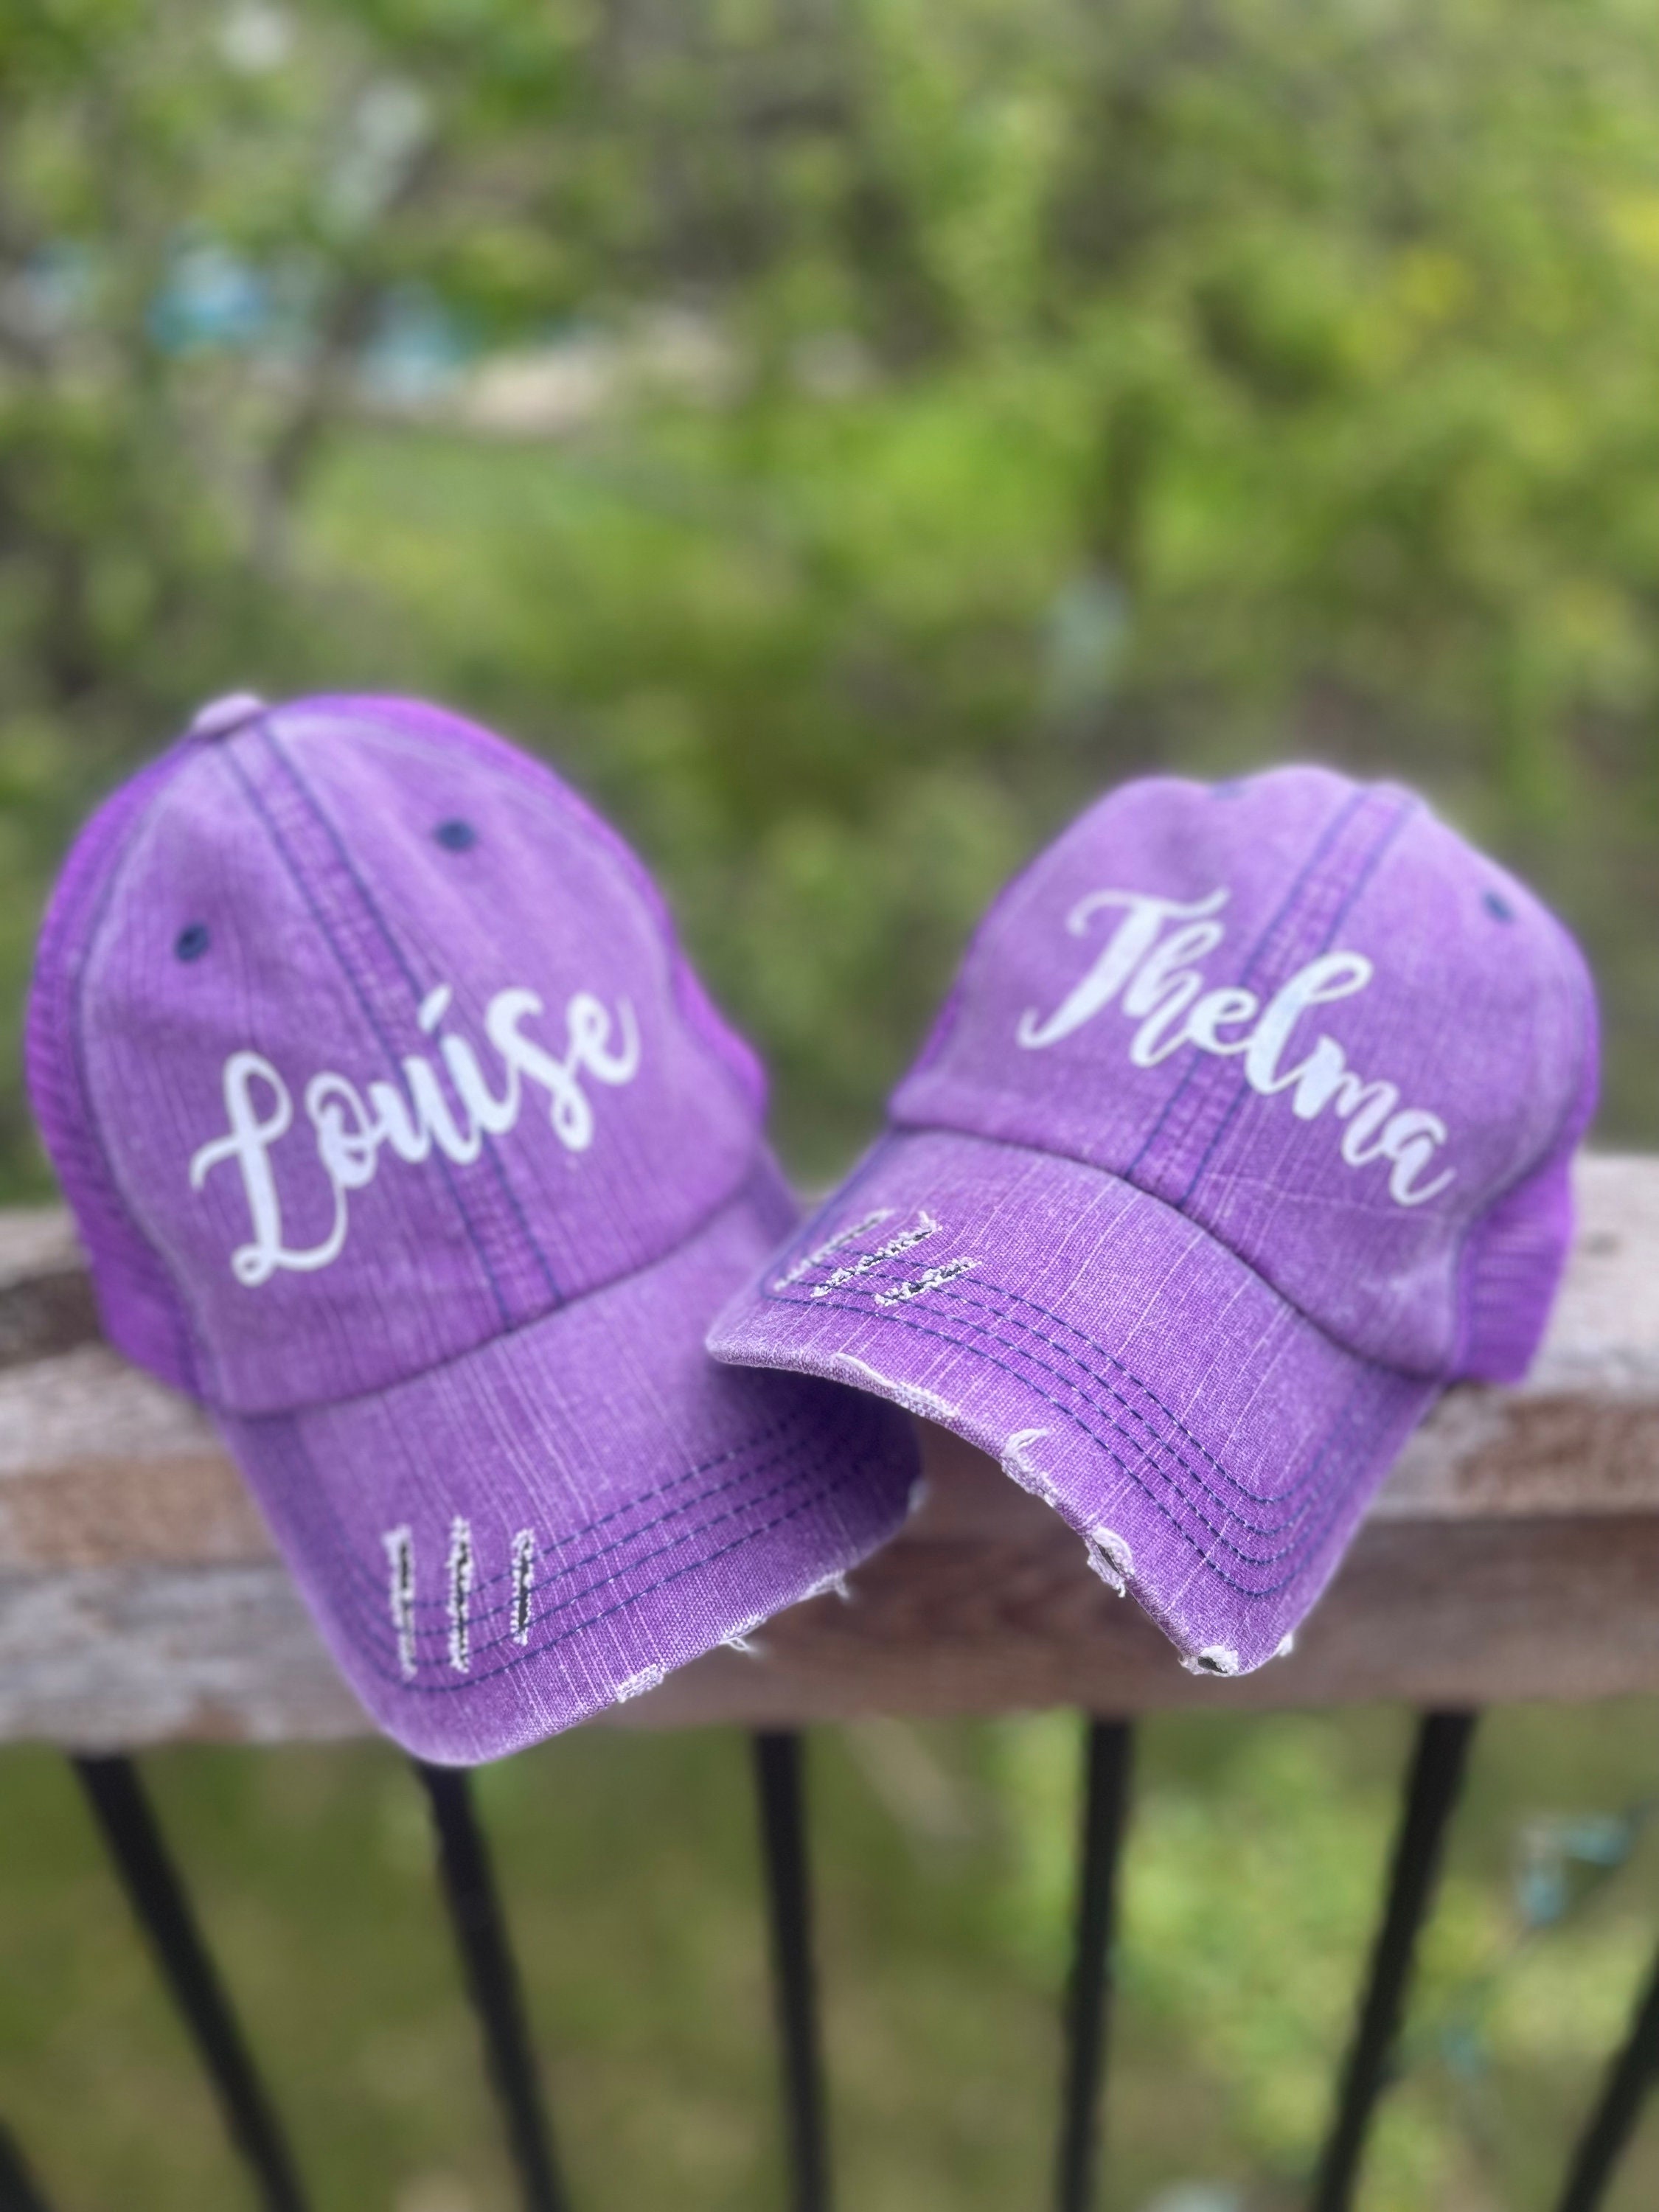 Thelma & Louise Distressed Trucker Hats